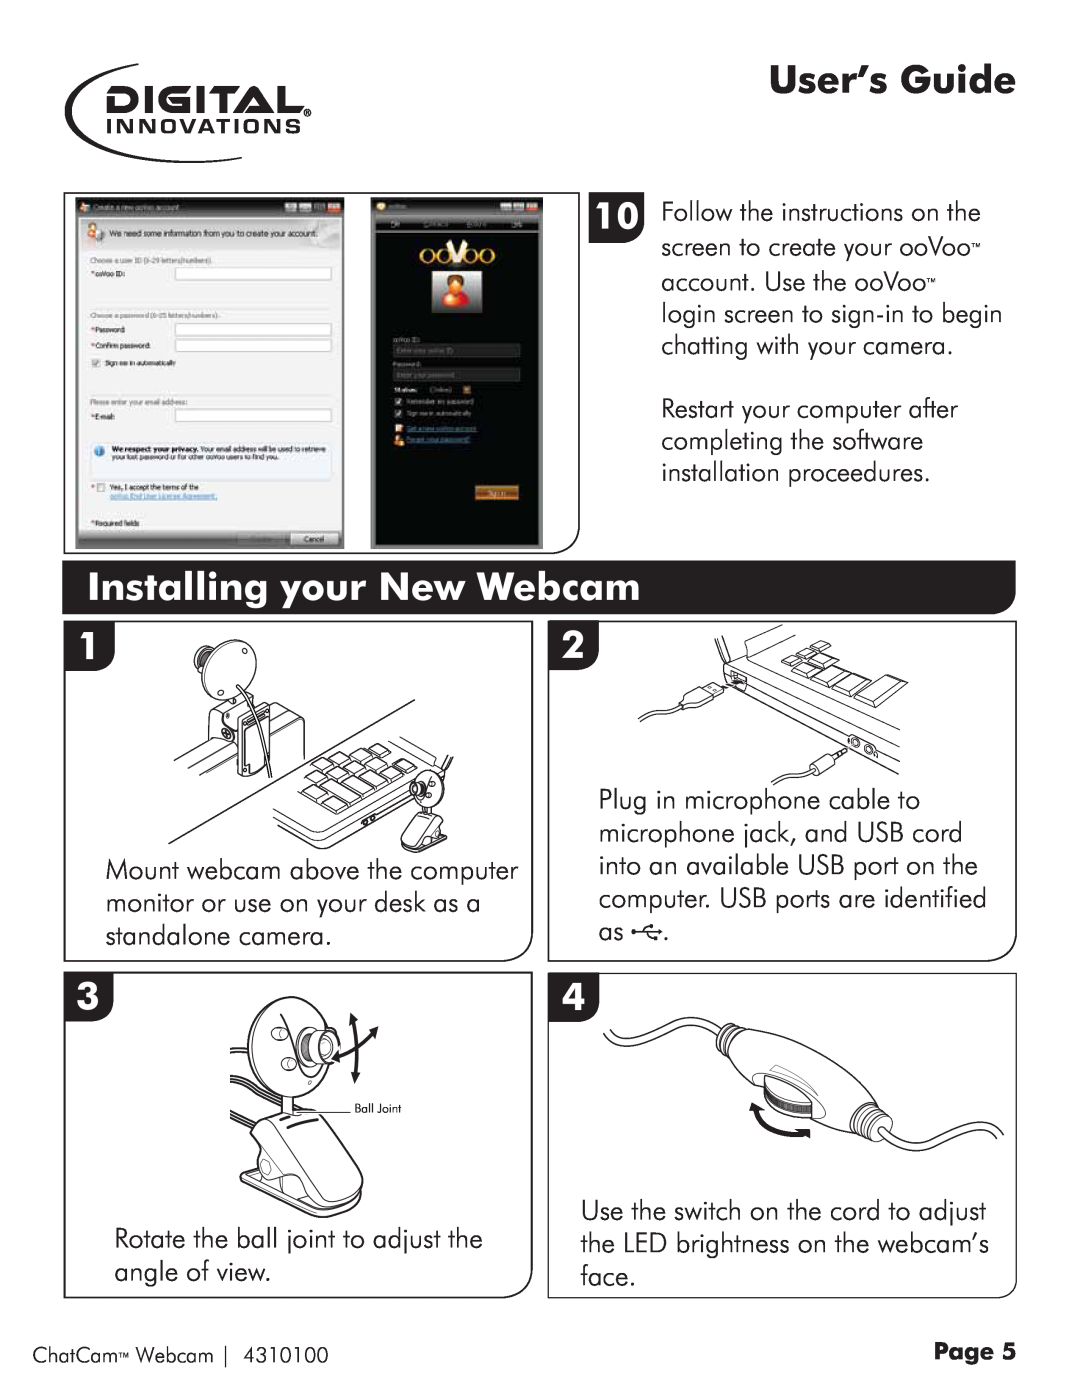 Micro Innovations 4310100 quick start Installing your New Webcam, User’s Guide 